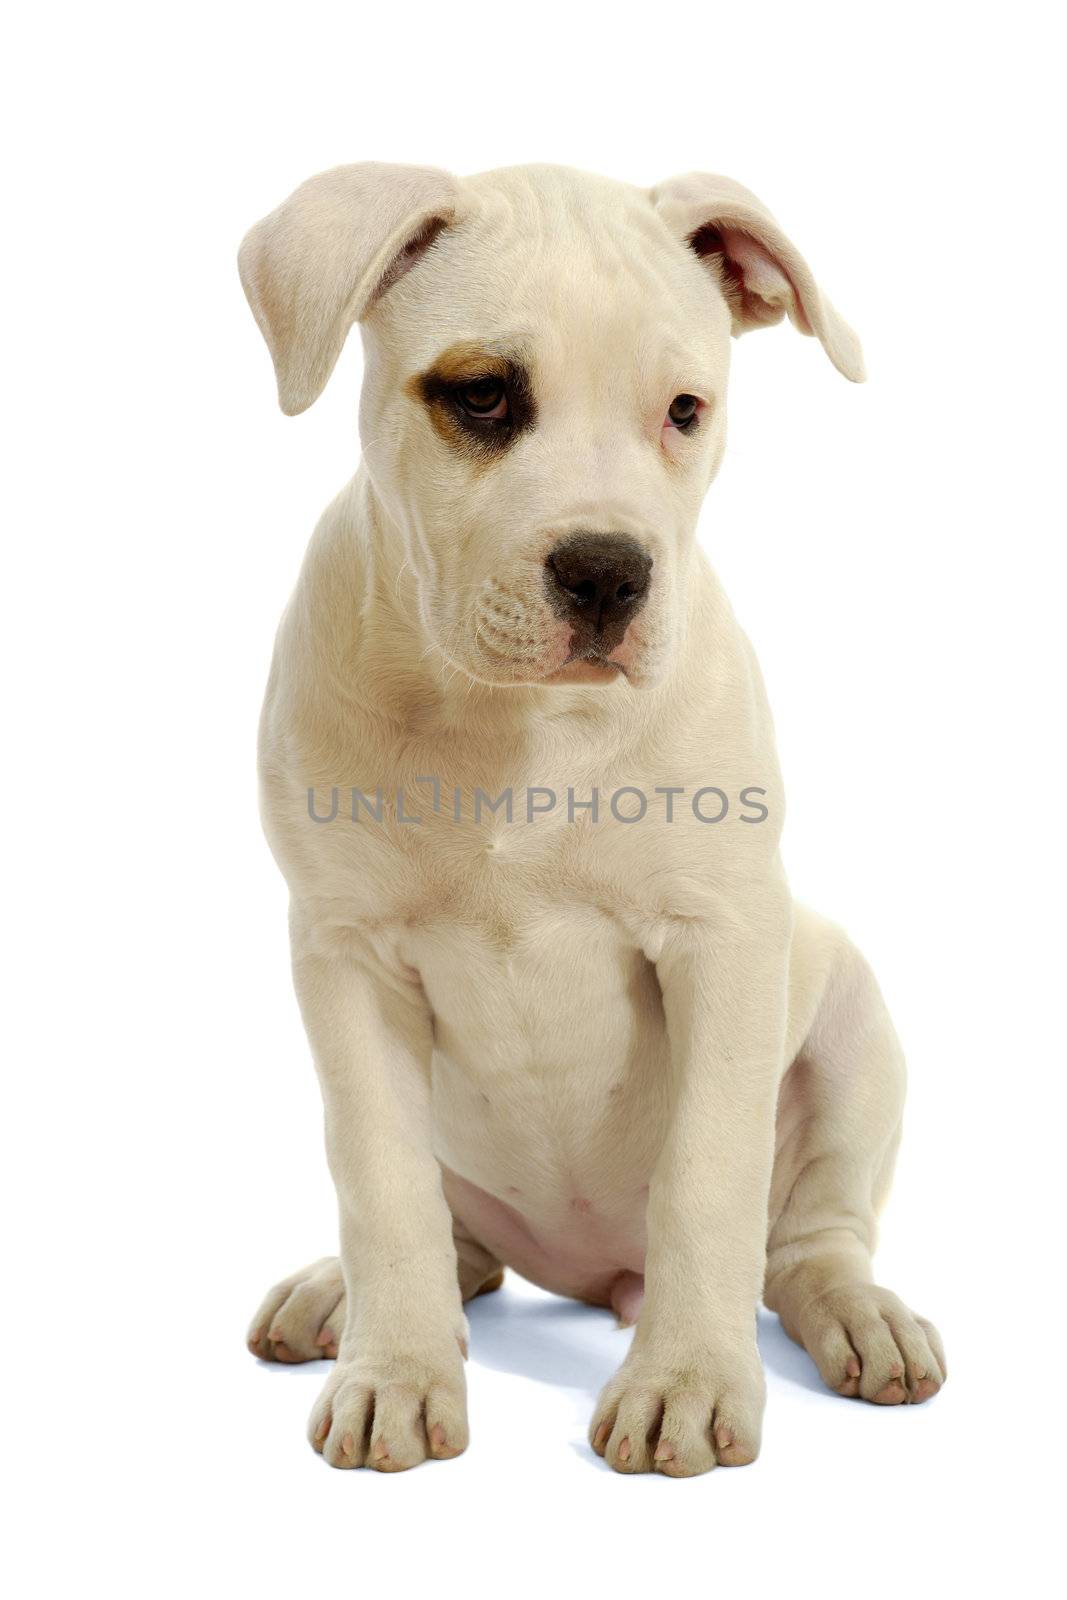 Puppy sitting on a white background